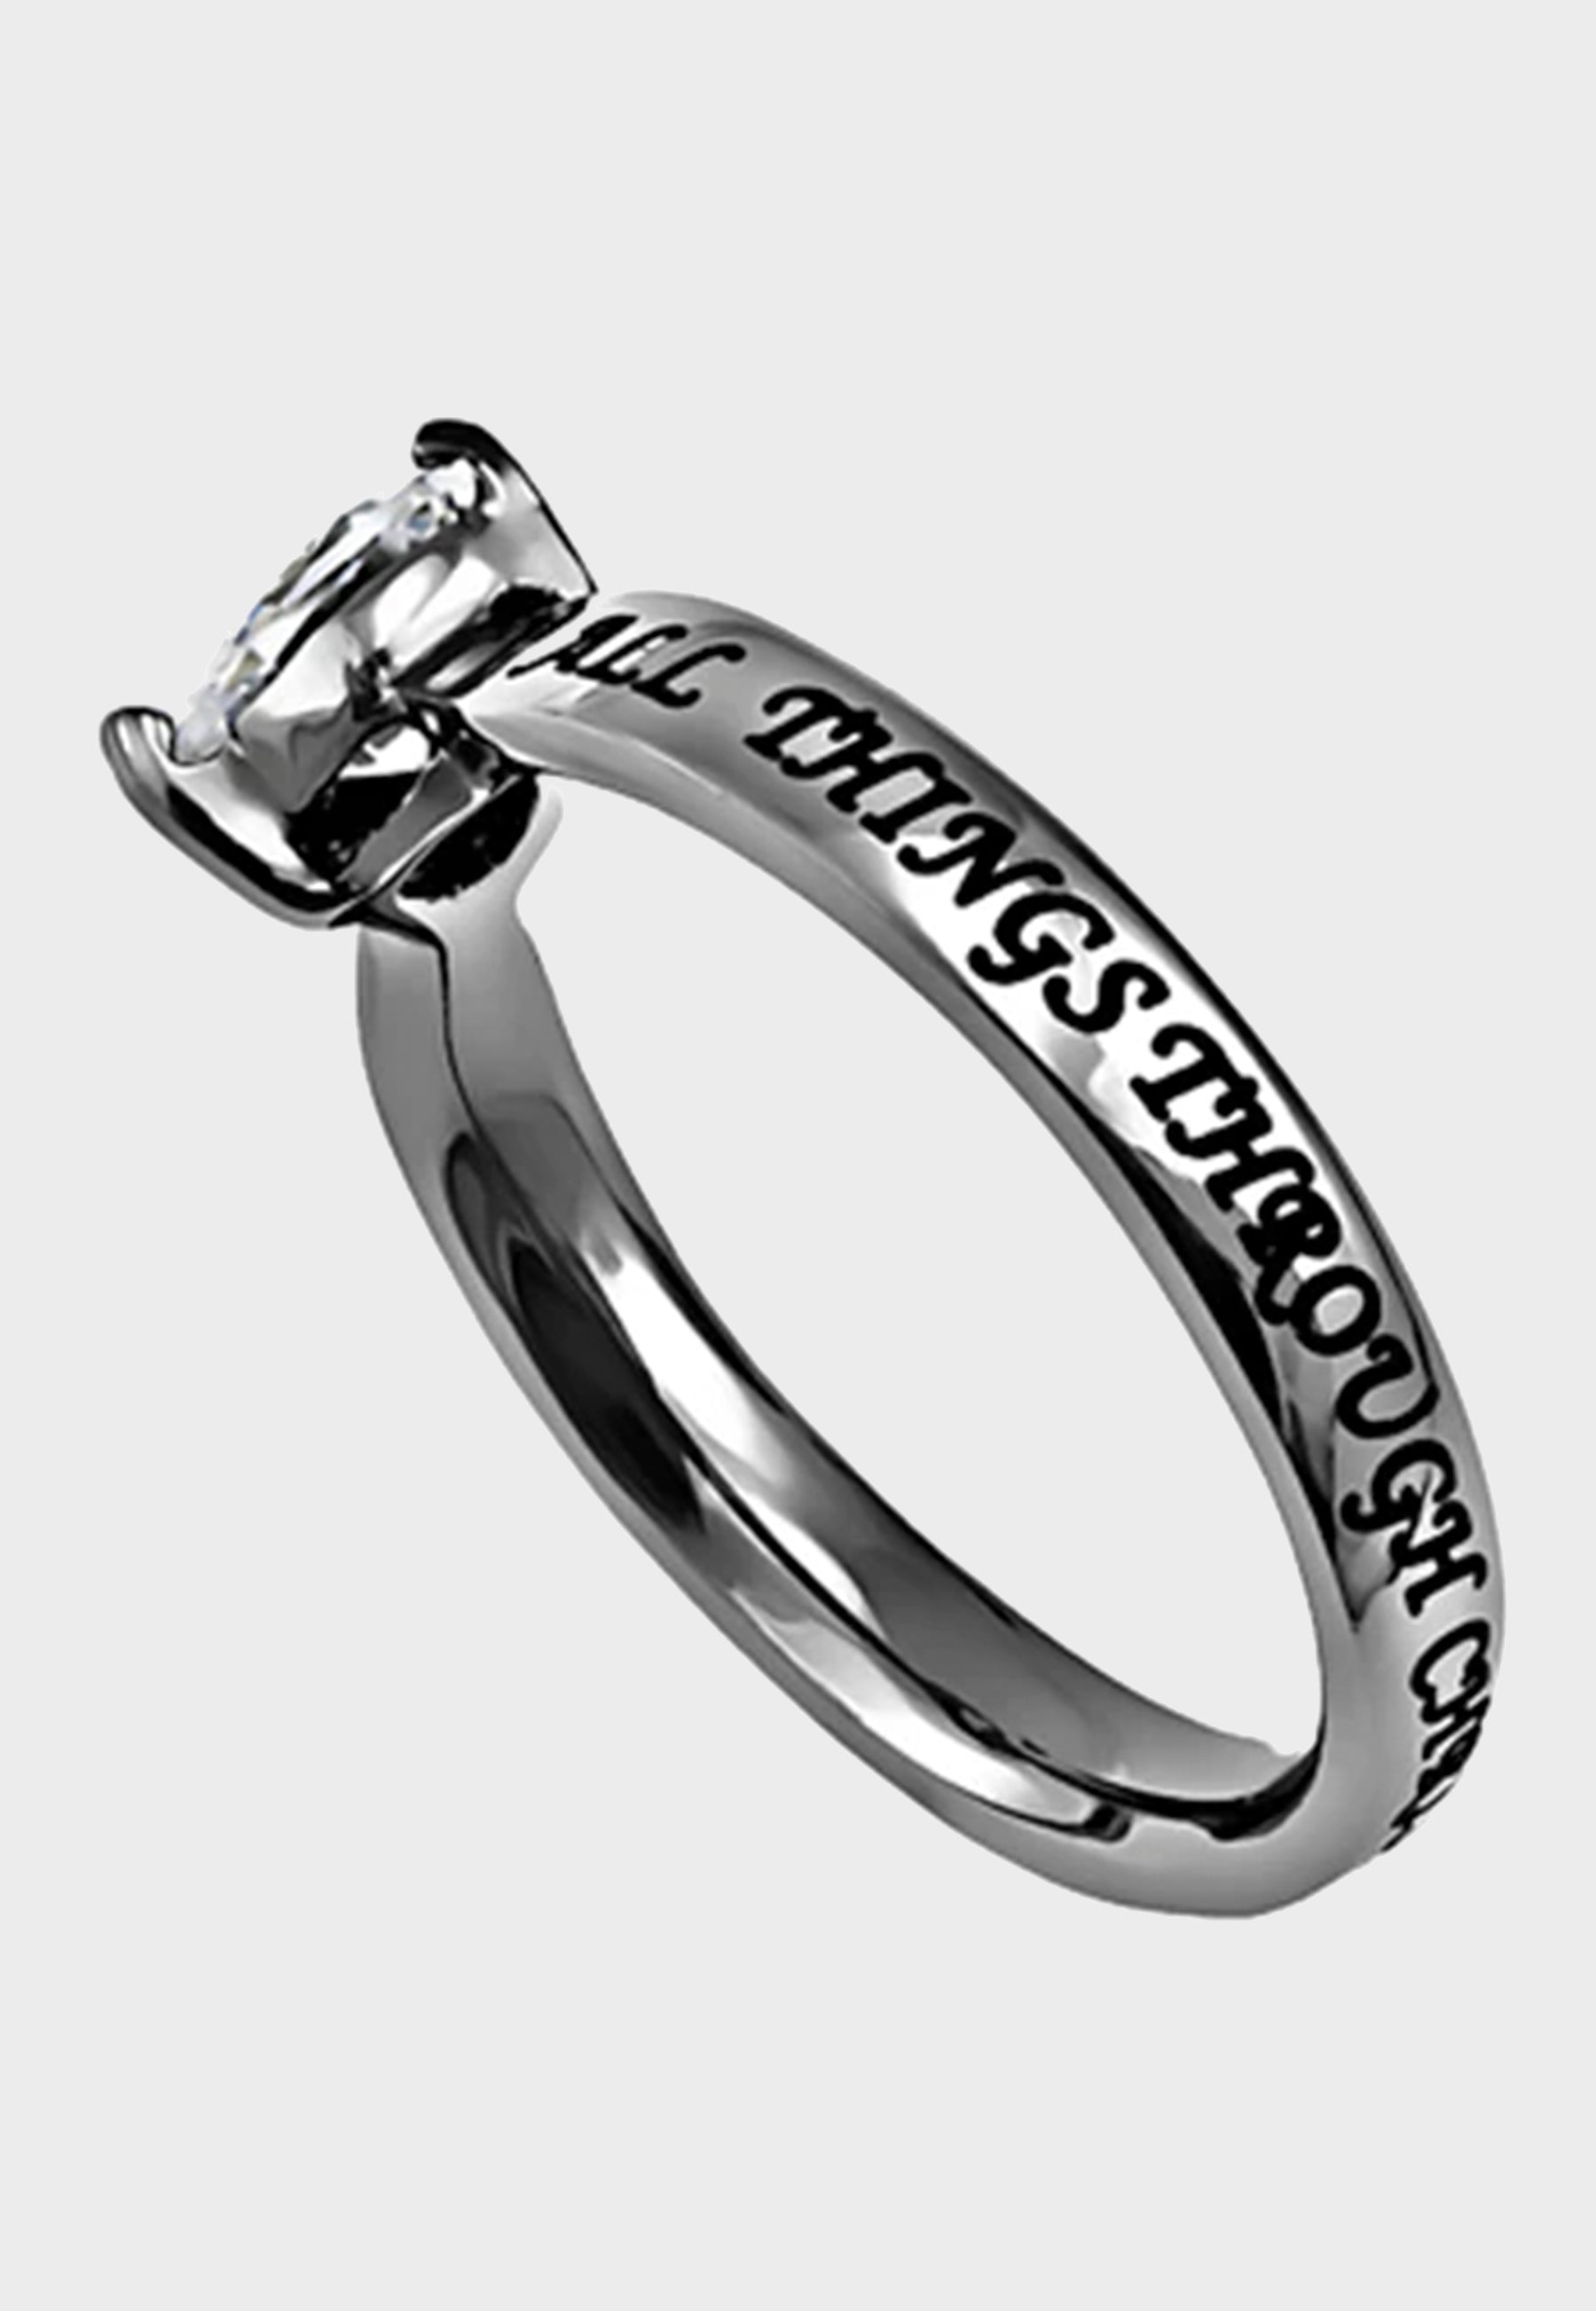 Women's Christian ring with cubic zerconium